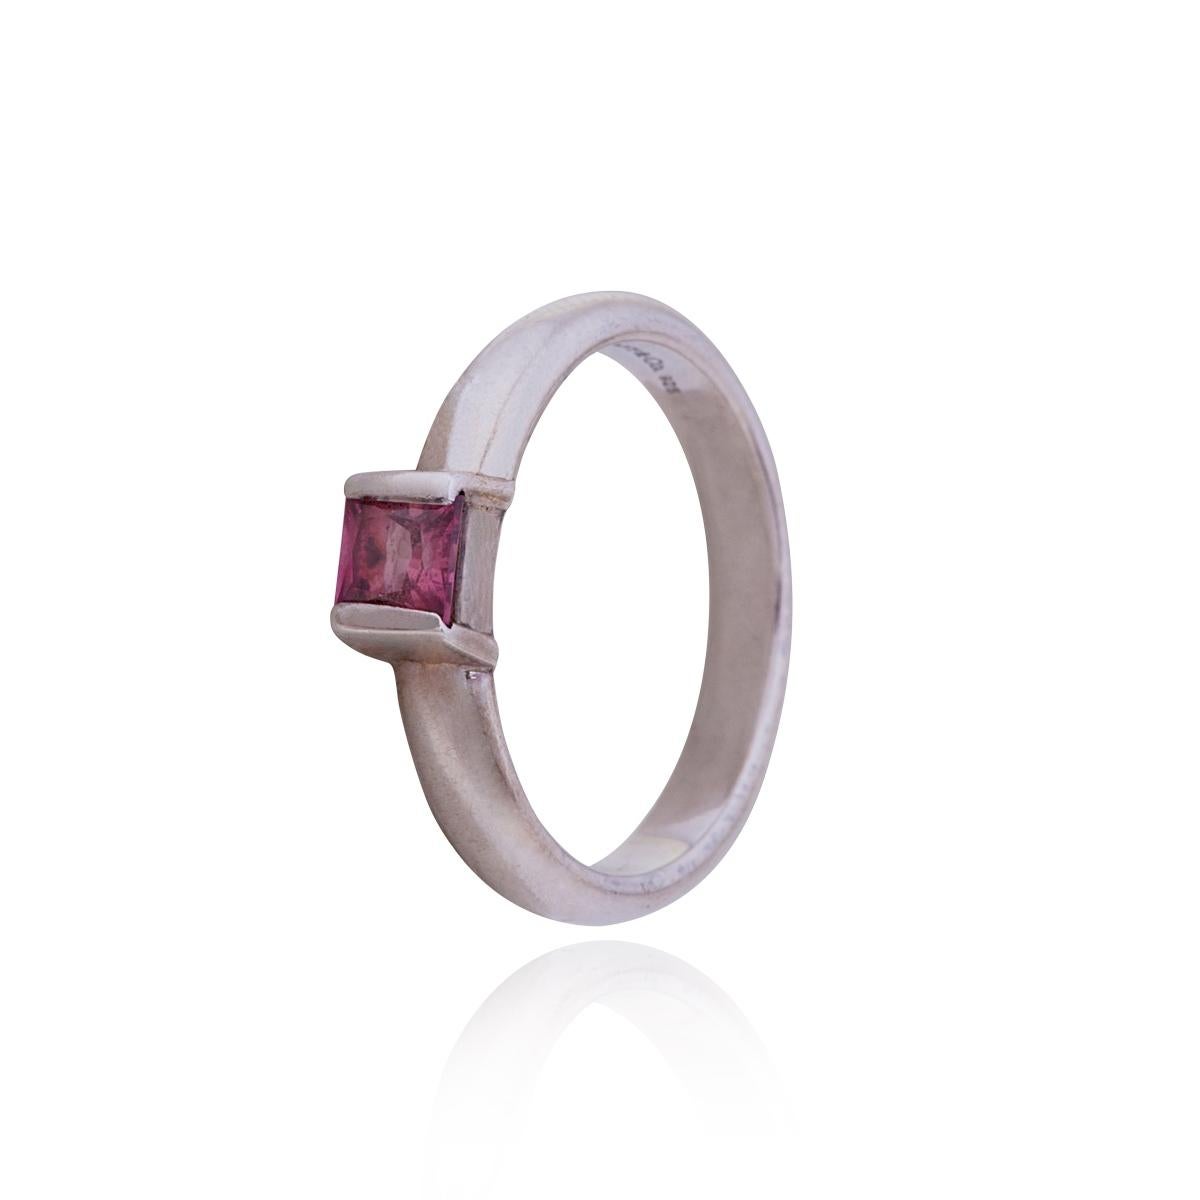 Tiffany & Co. sterling silver and pink sapphire stone ring, United States, 2004. The ring is stamped 